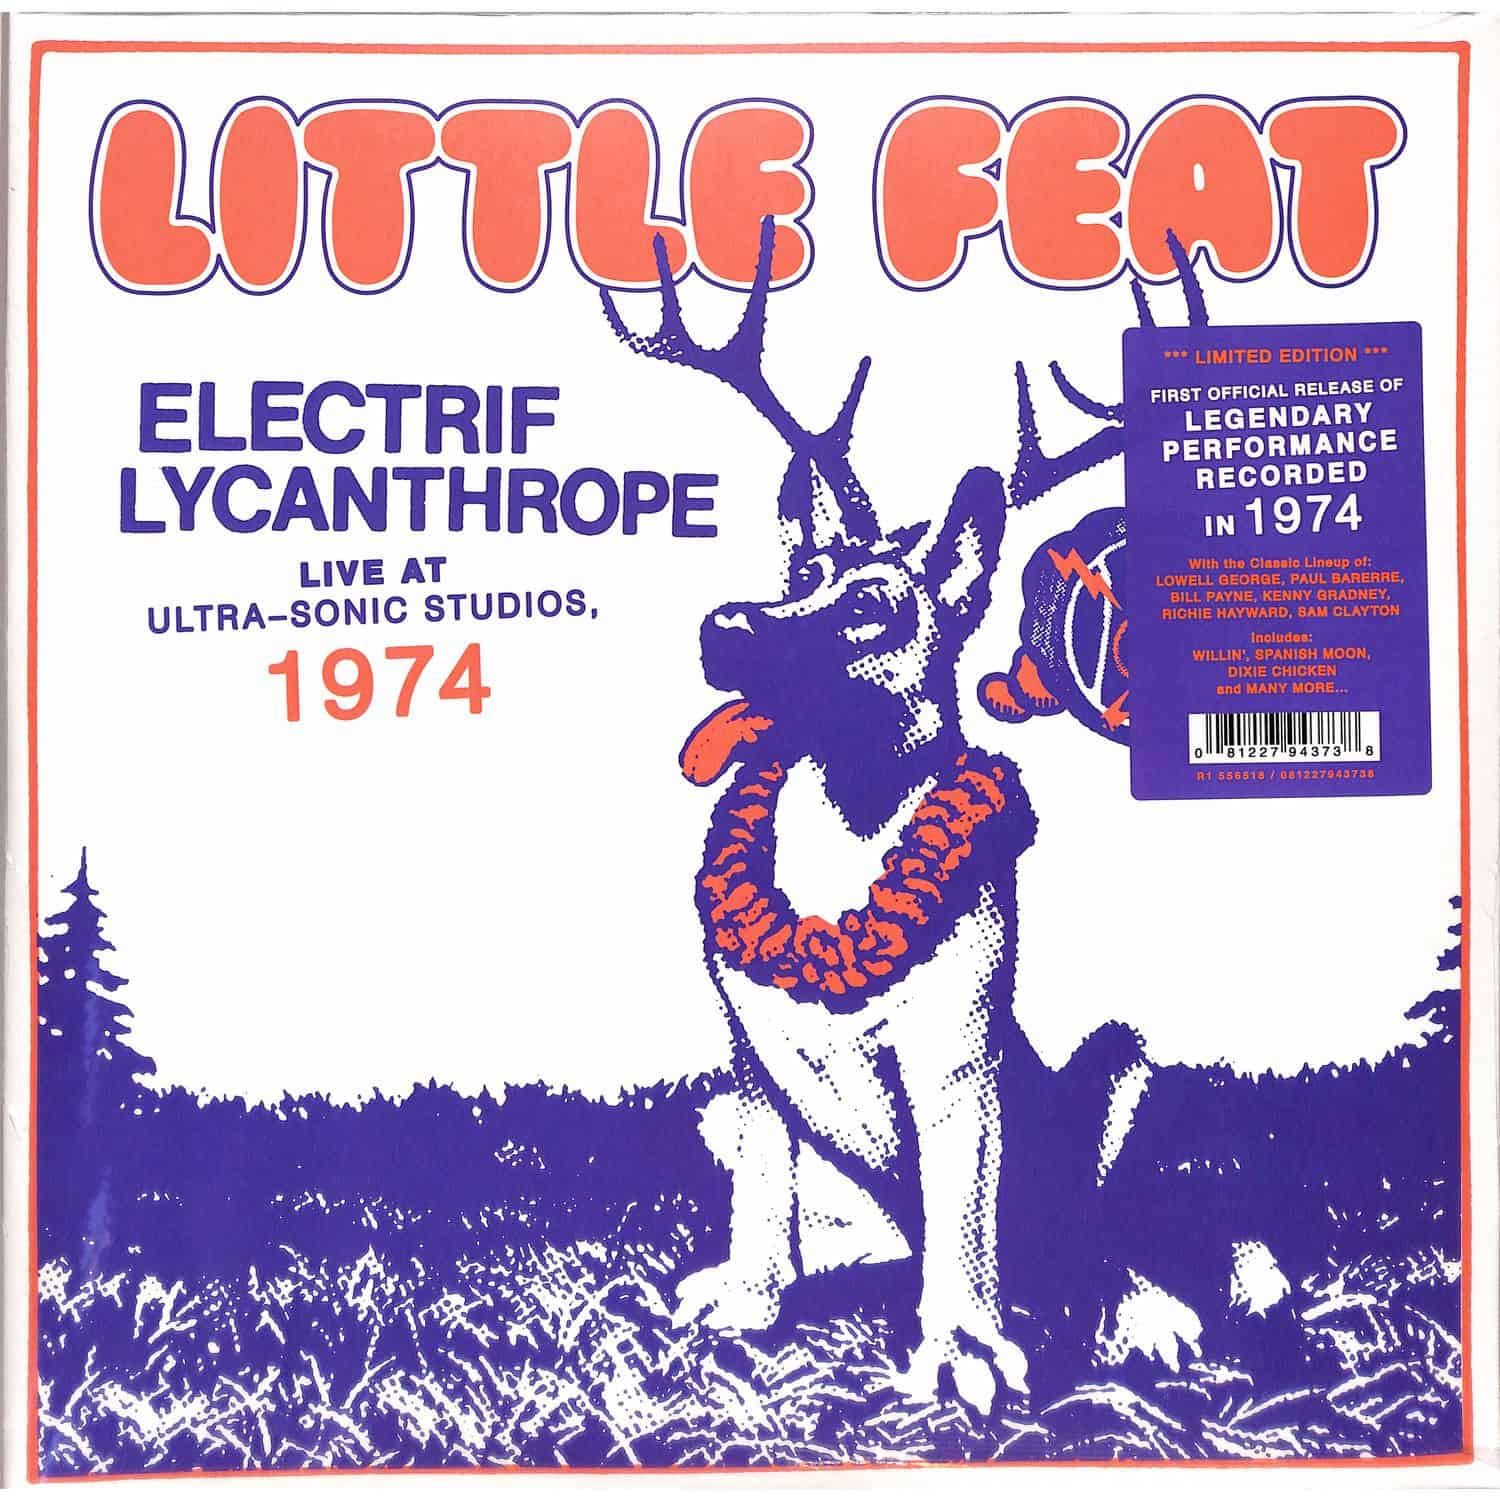 Little Feat - ELECTRIF LYCANTHROPE: LIVE AT ULTRA-SONIC STUDIOS74 